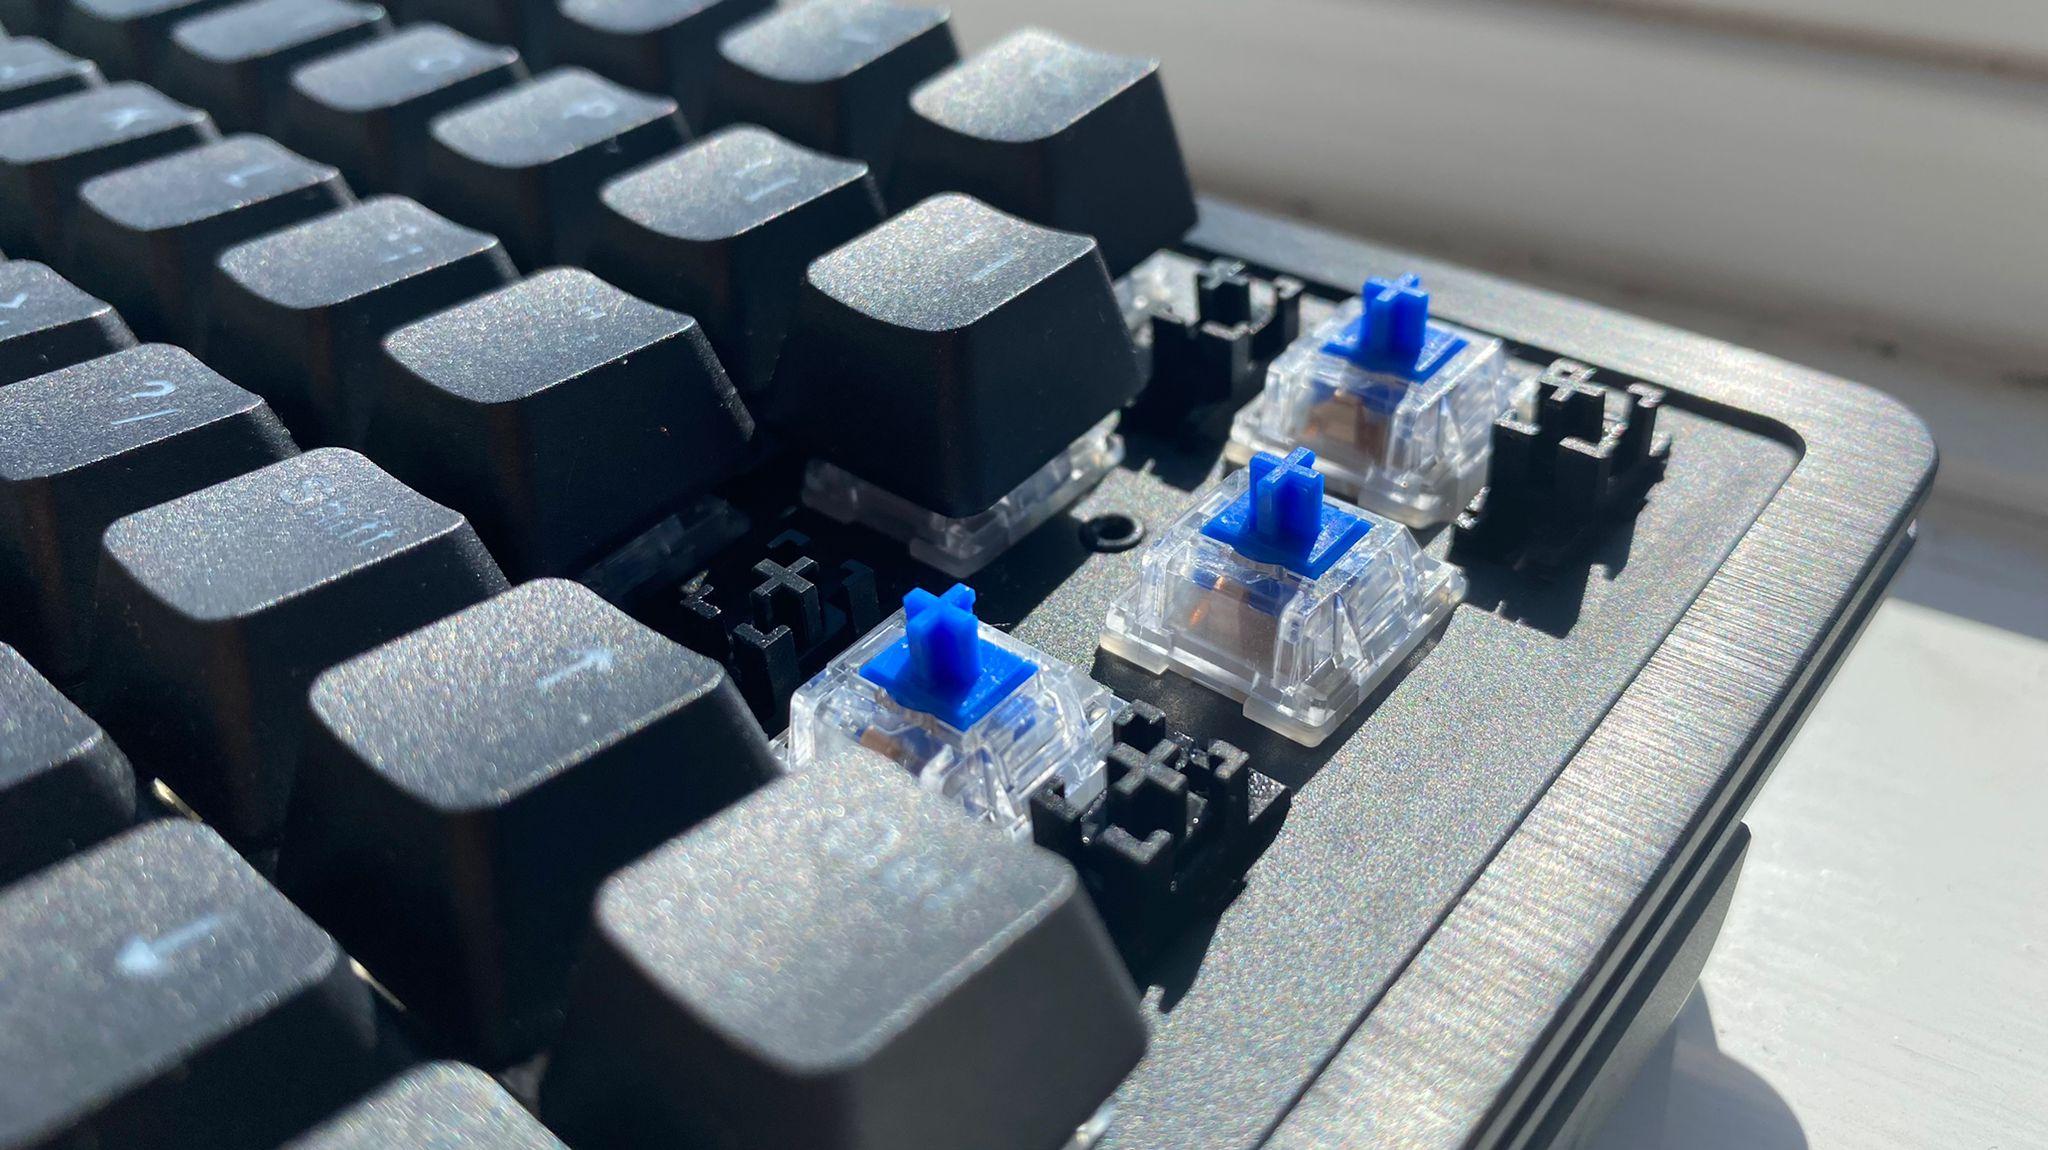 The Mountain Everest 60's Tactile 55 switches